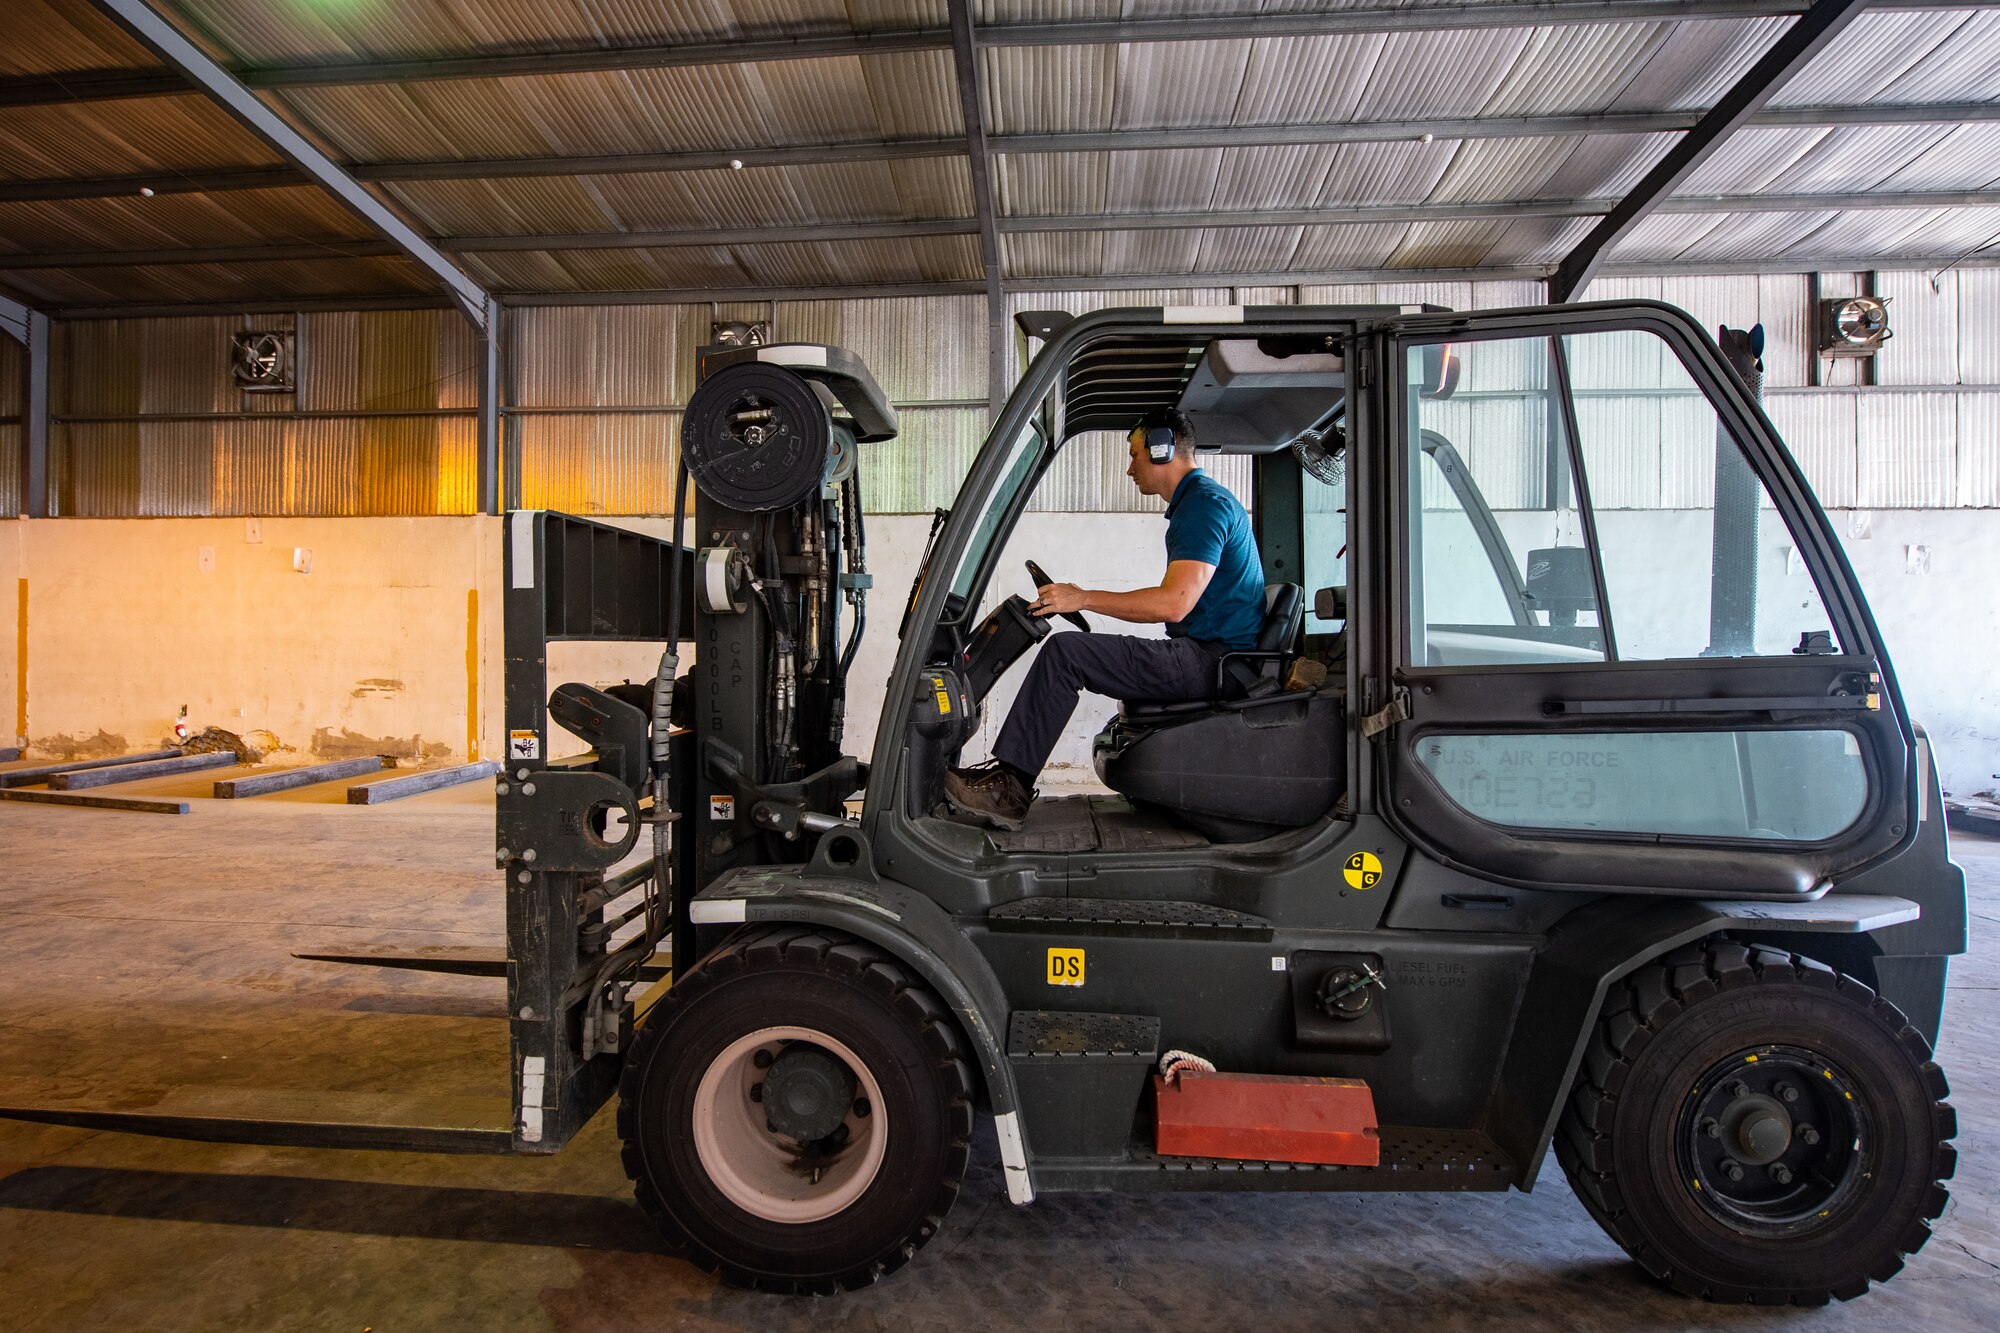 Staff Sgt. Tony Bellow, NCO-in-charge of Cargo Operations, Jordan Port, 387th Air Expeditionary Squadron, operates a fork-lift inside a warehouse while positioning cargo for future movements in Jordan, Oct. 14, 2019.